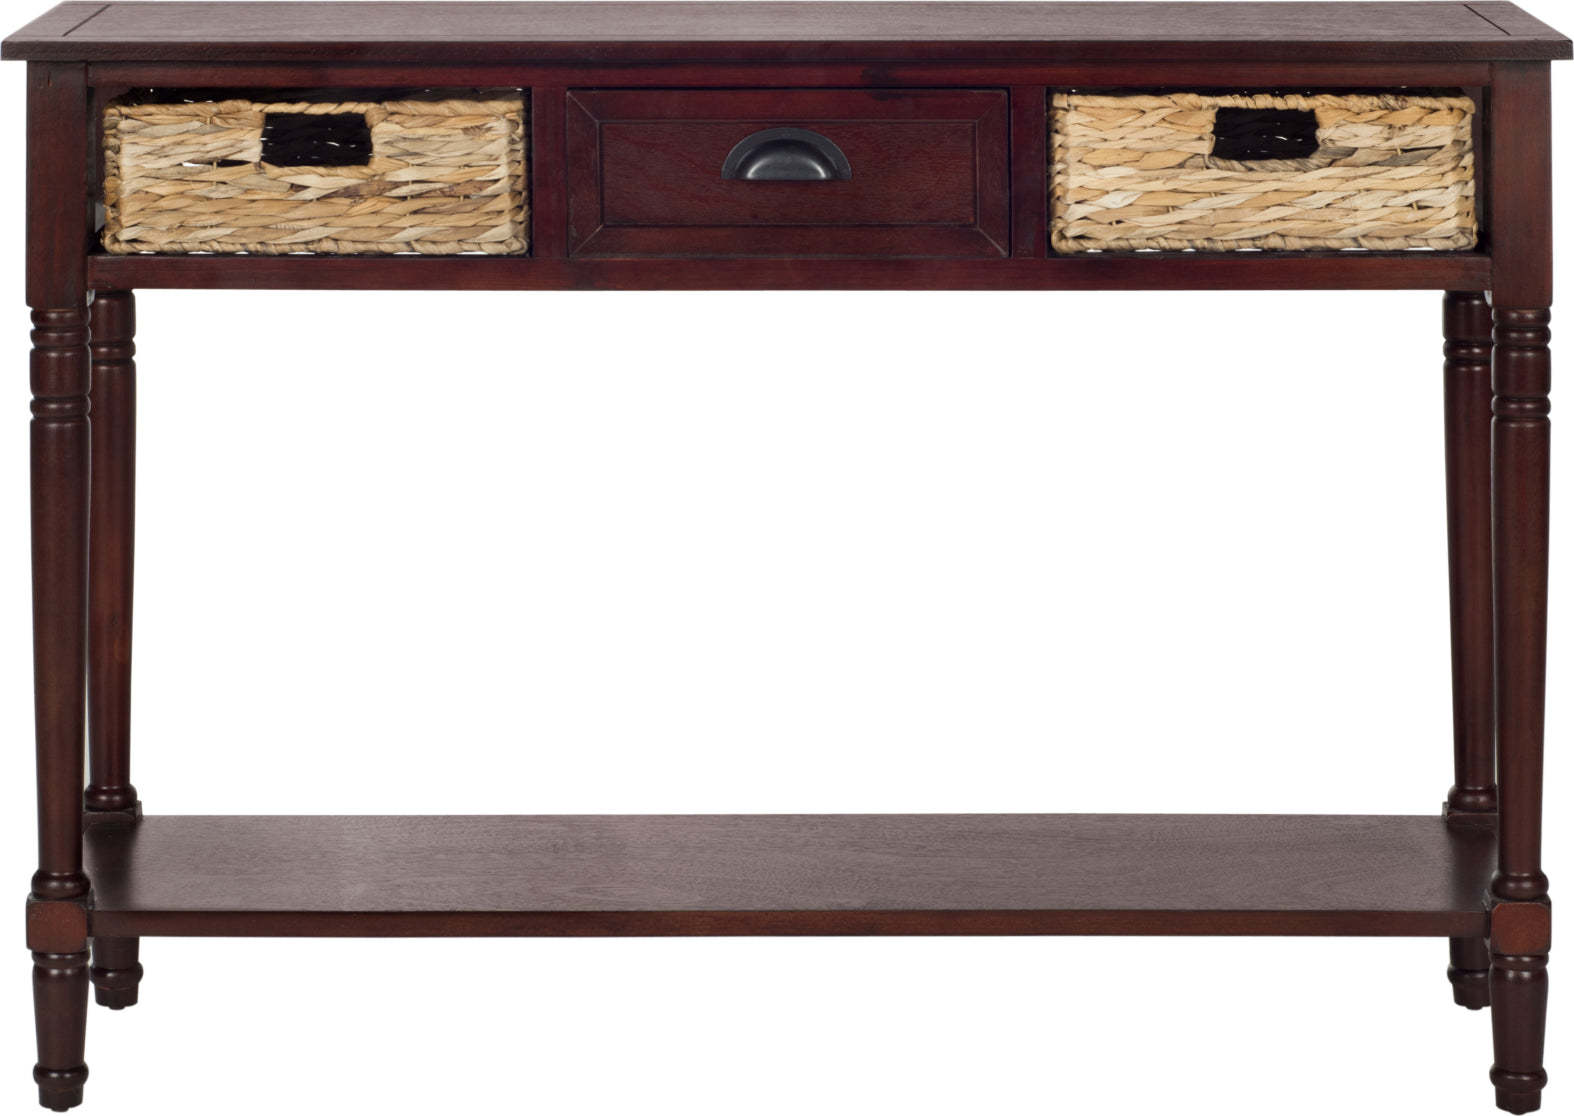 Safavieh Christa Console Table With Storage Cherry Furniture main image